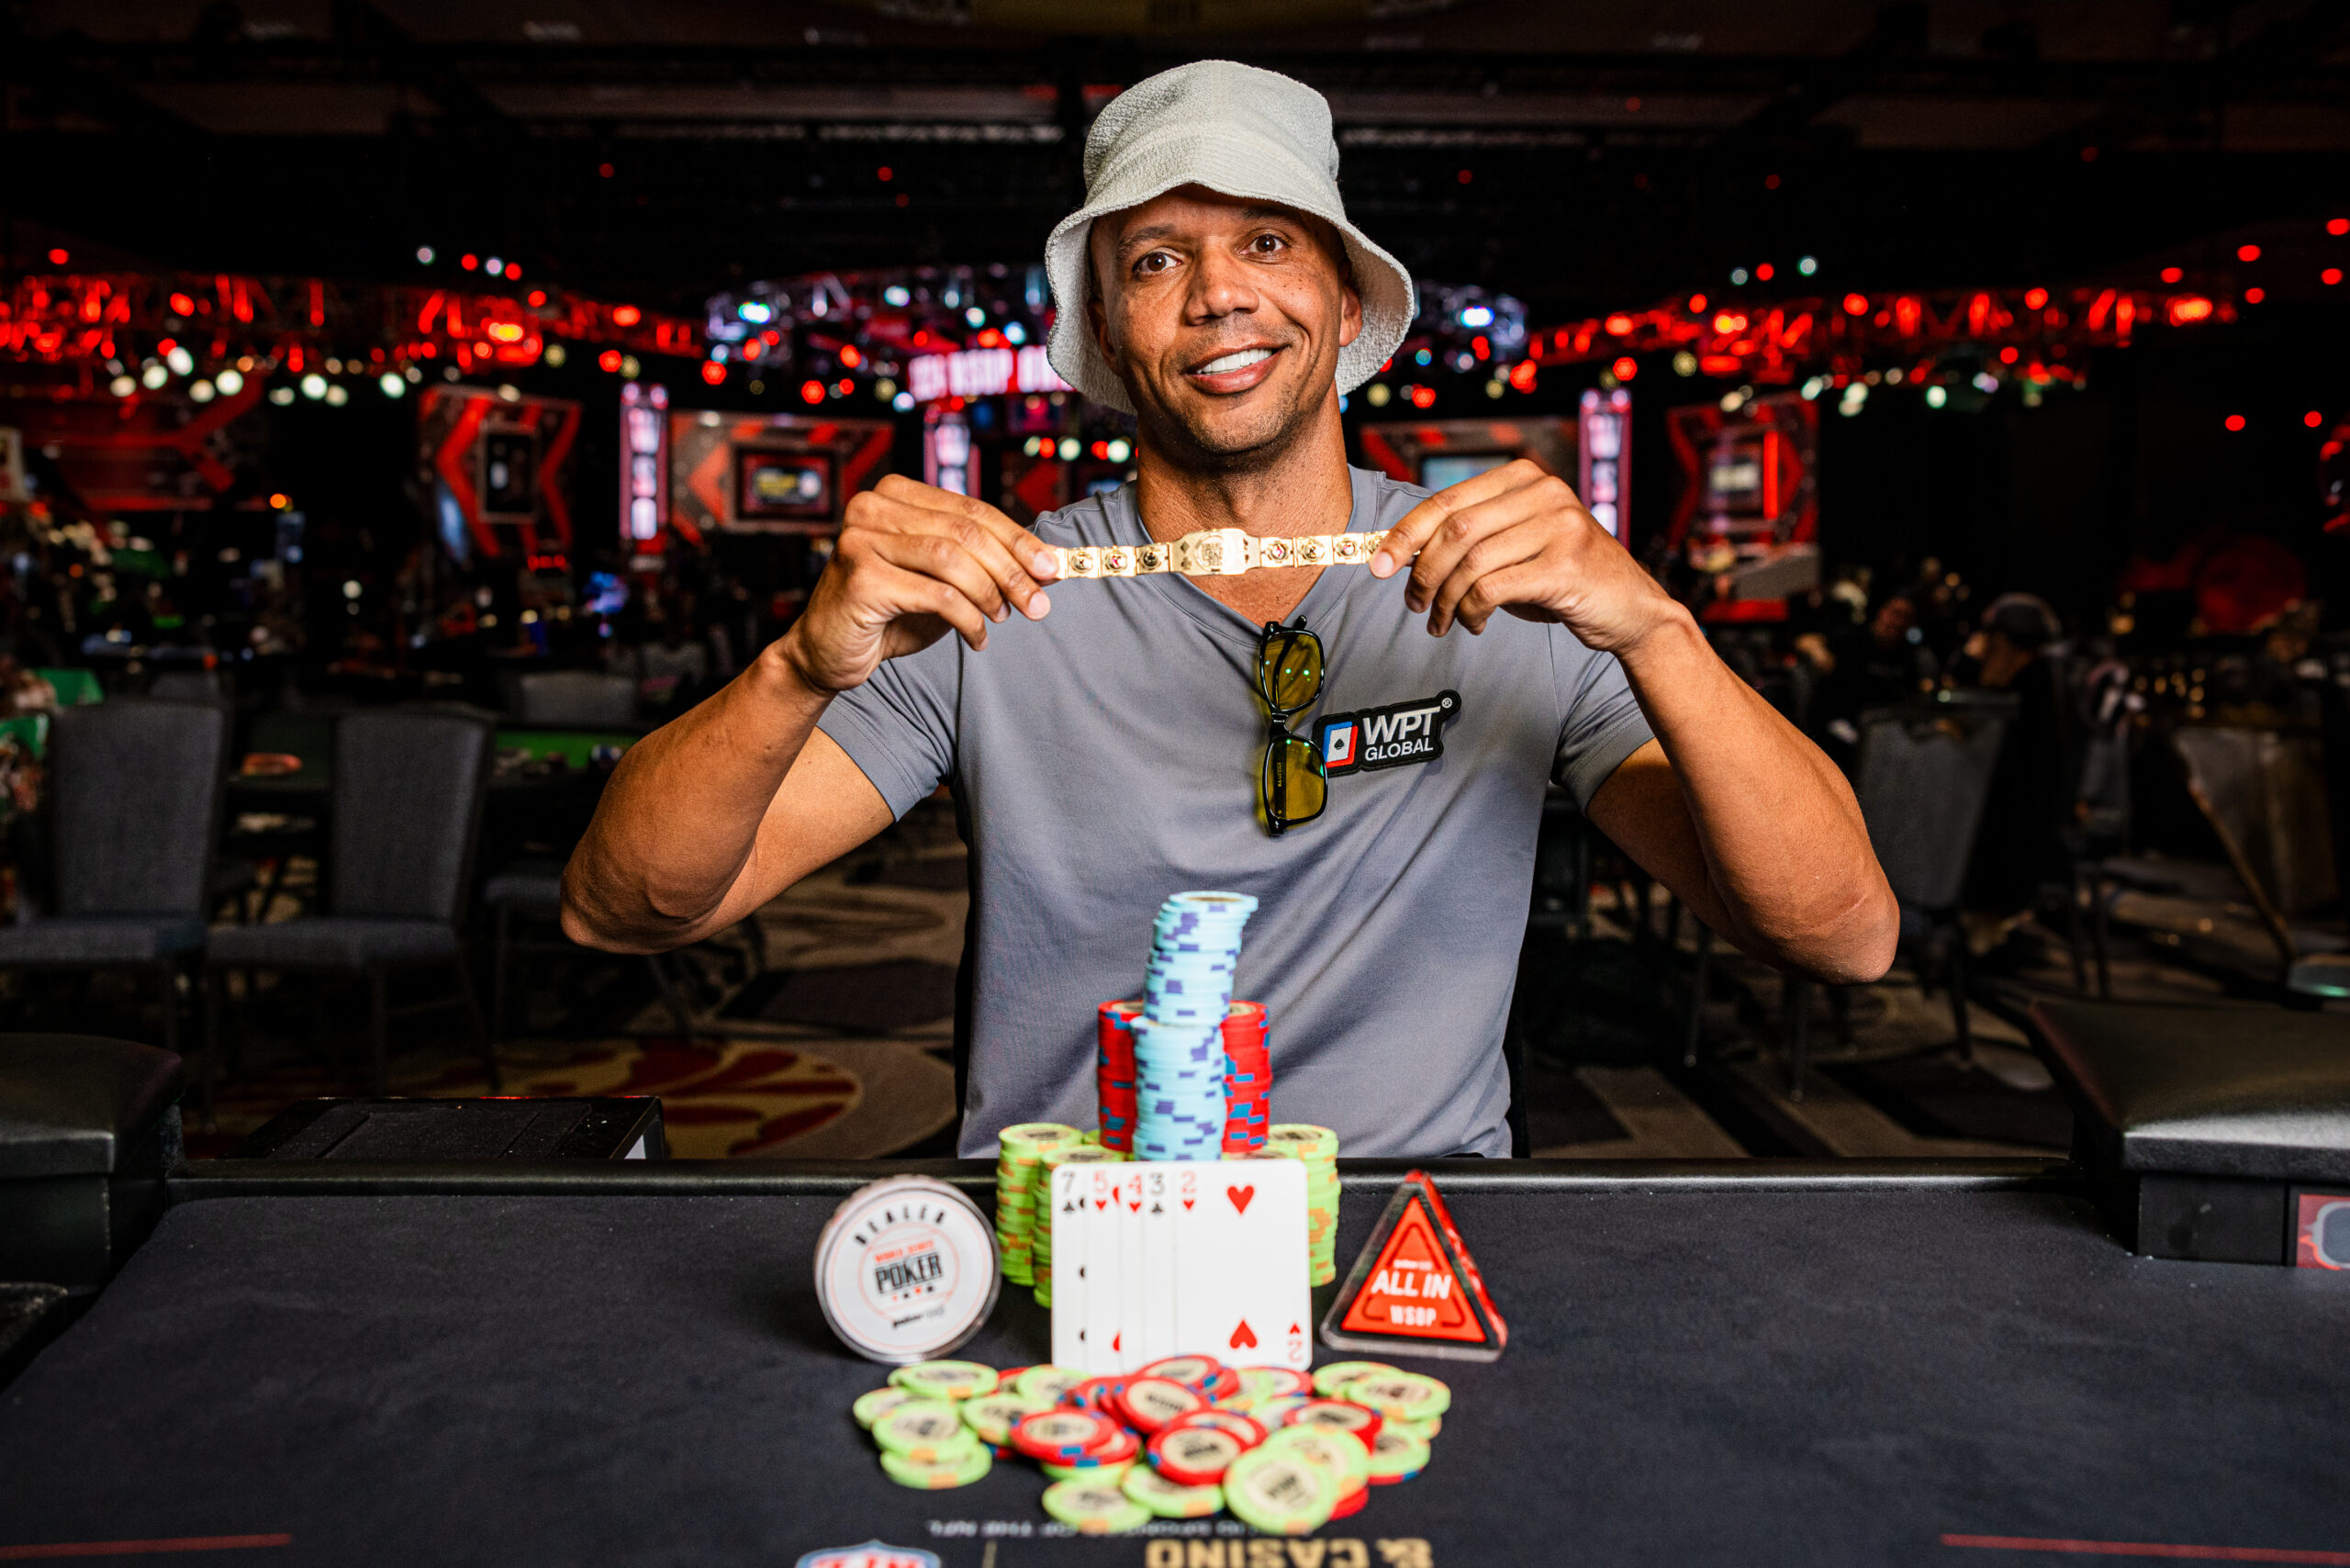 Phil Ivey Wins Eleventh World Series of Poker Bracelet in $10,000 2-7 Triple Draw Championship